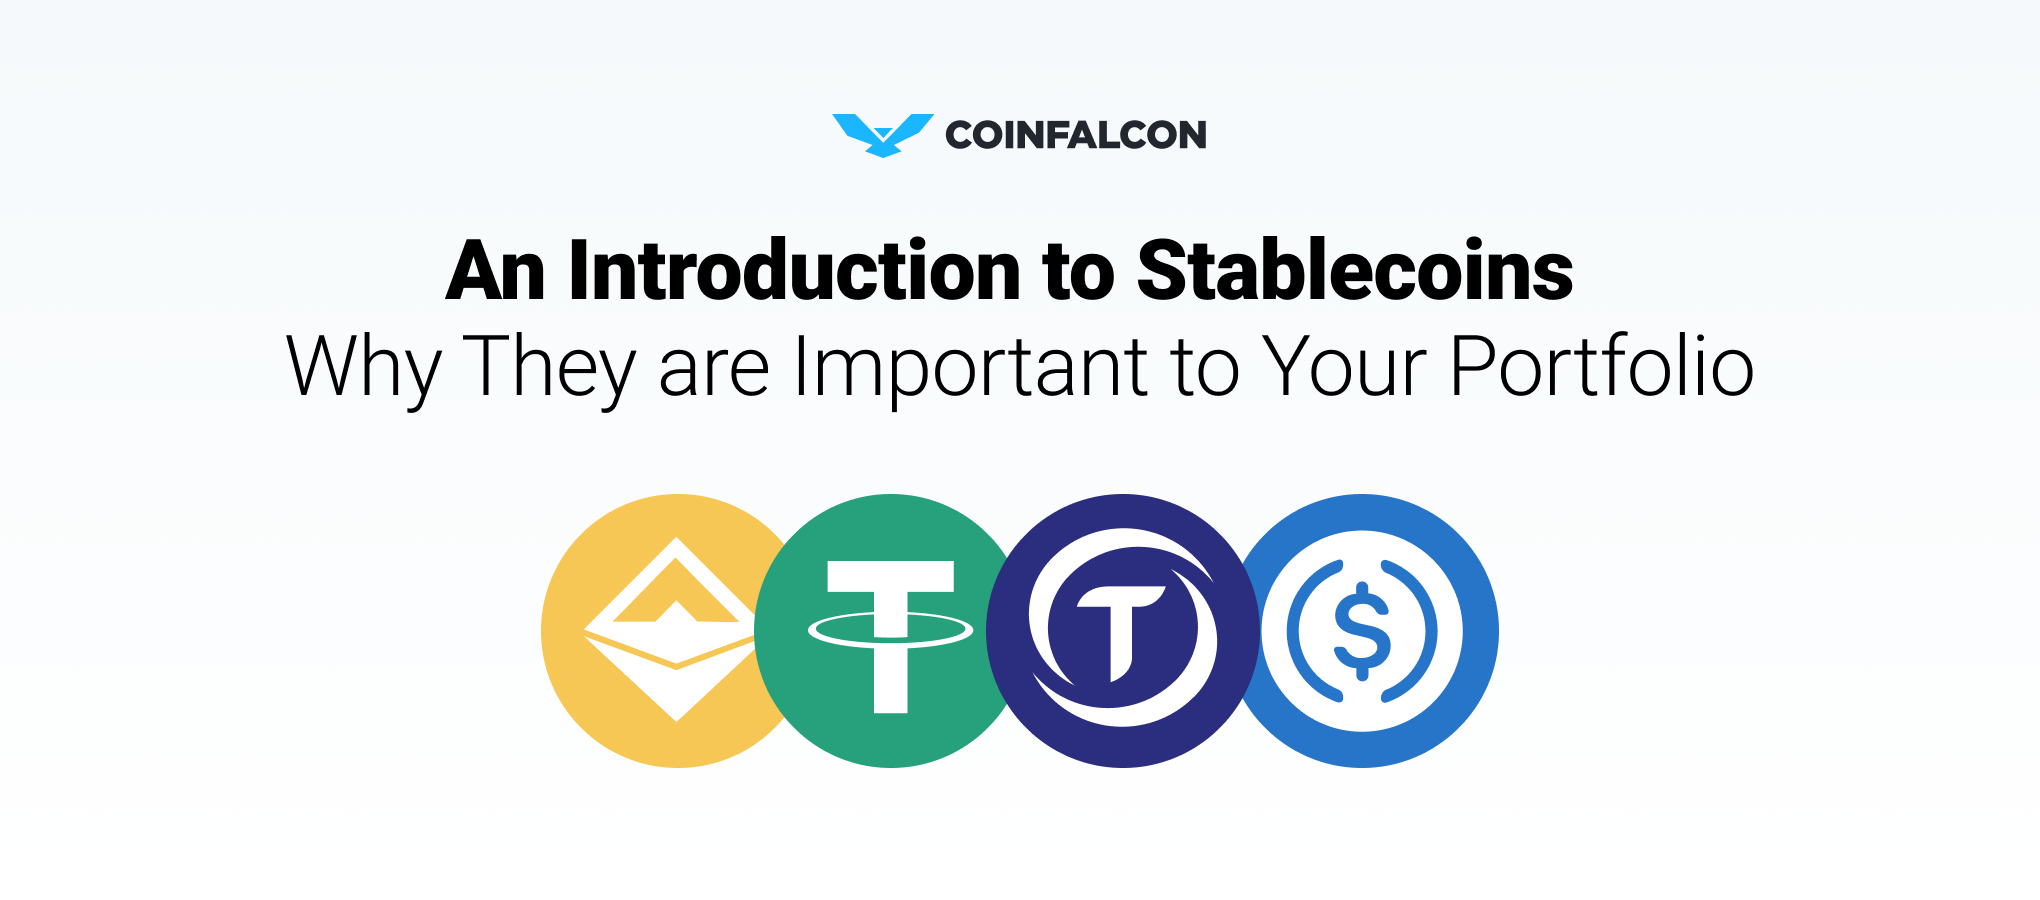 An Introduction to Stablecoins and Why They are Important to Your Portfolio